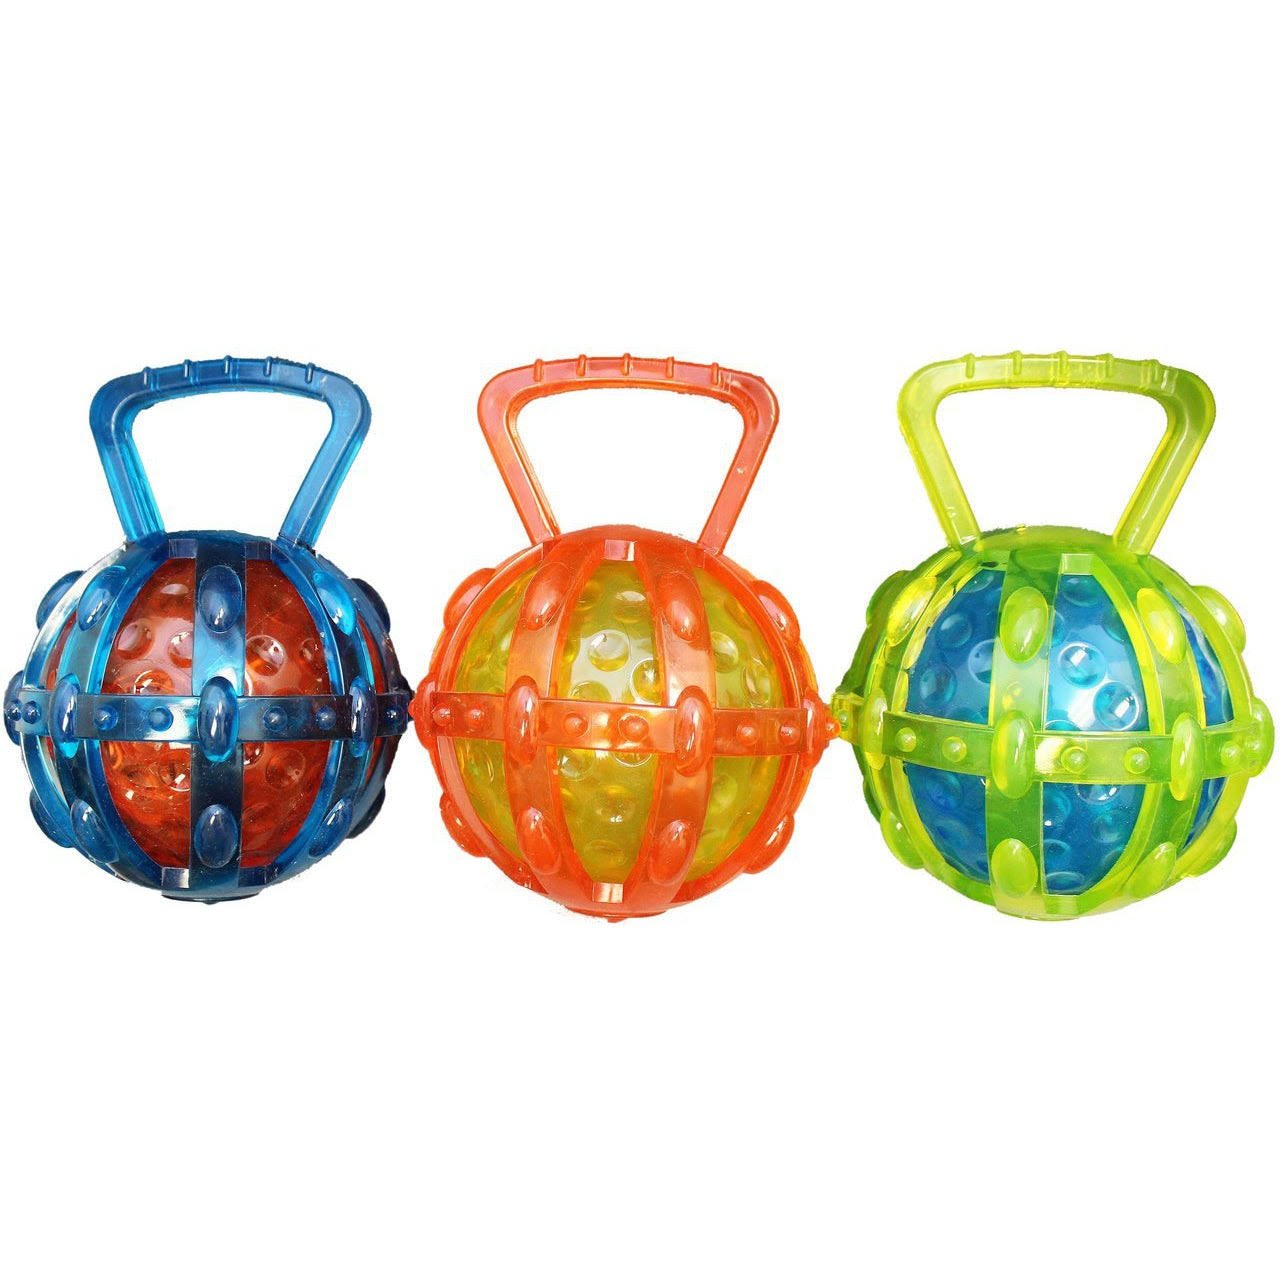 Chomper Ball Tug Dog Toy - Assorted Colors